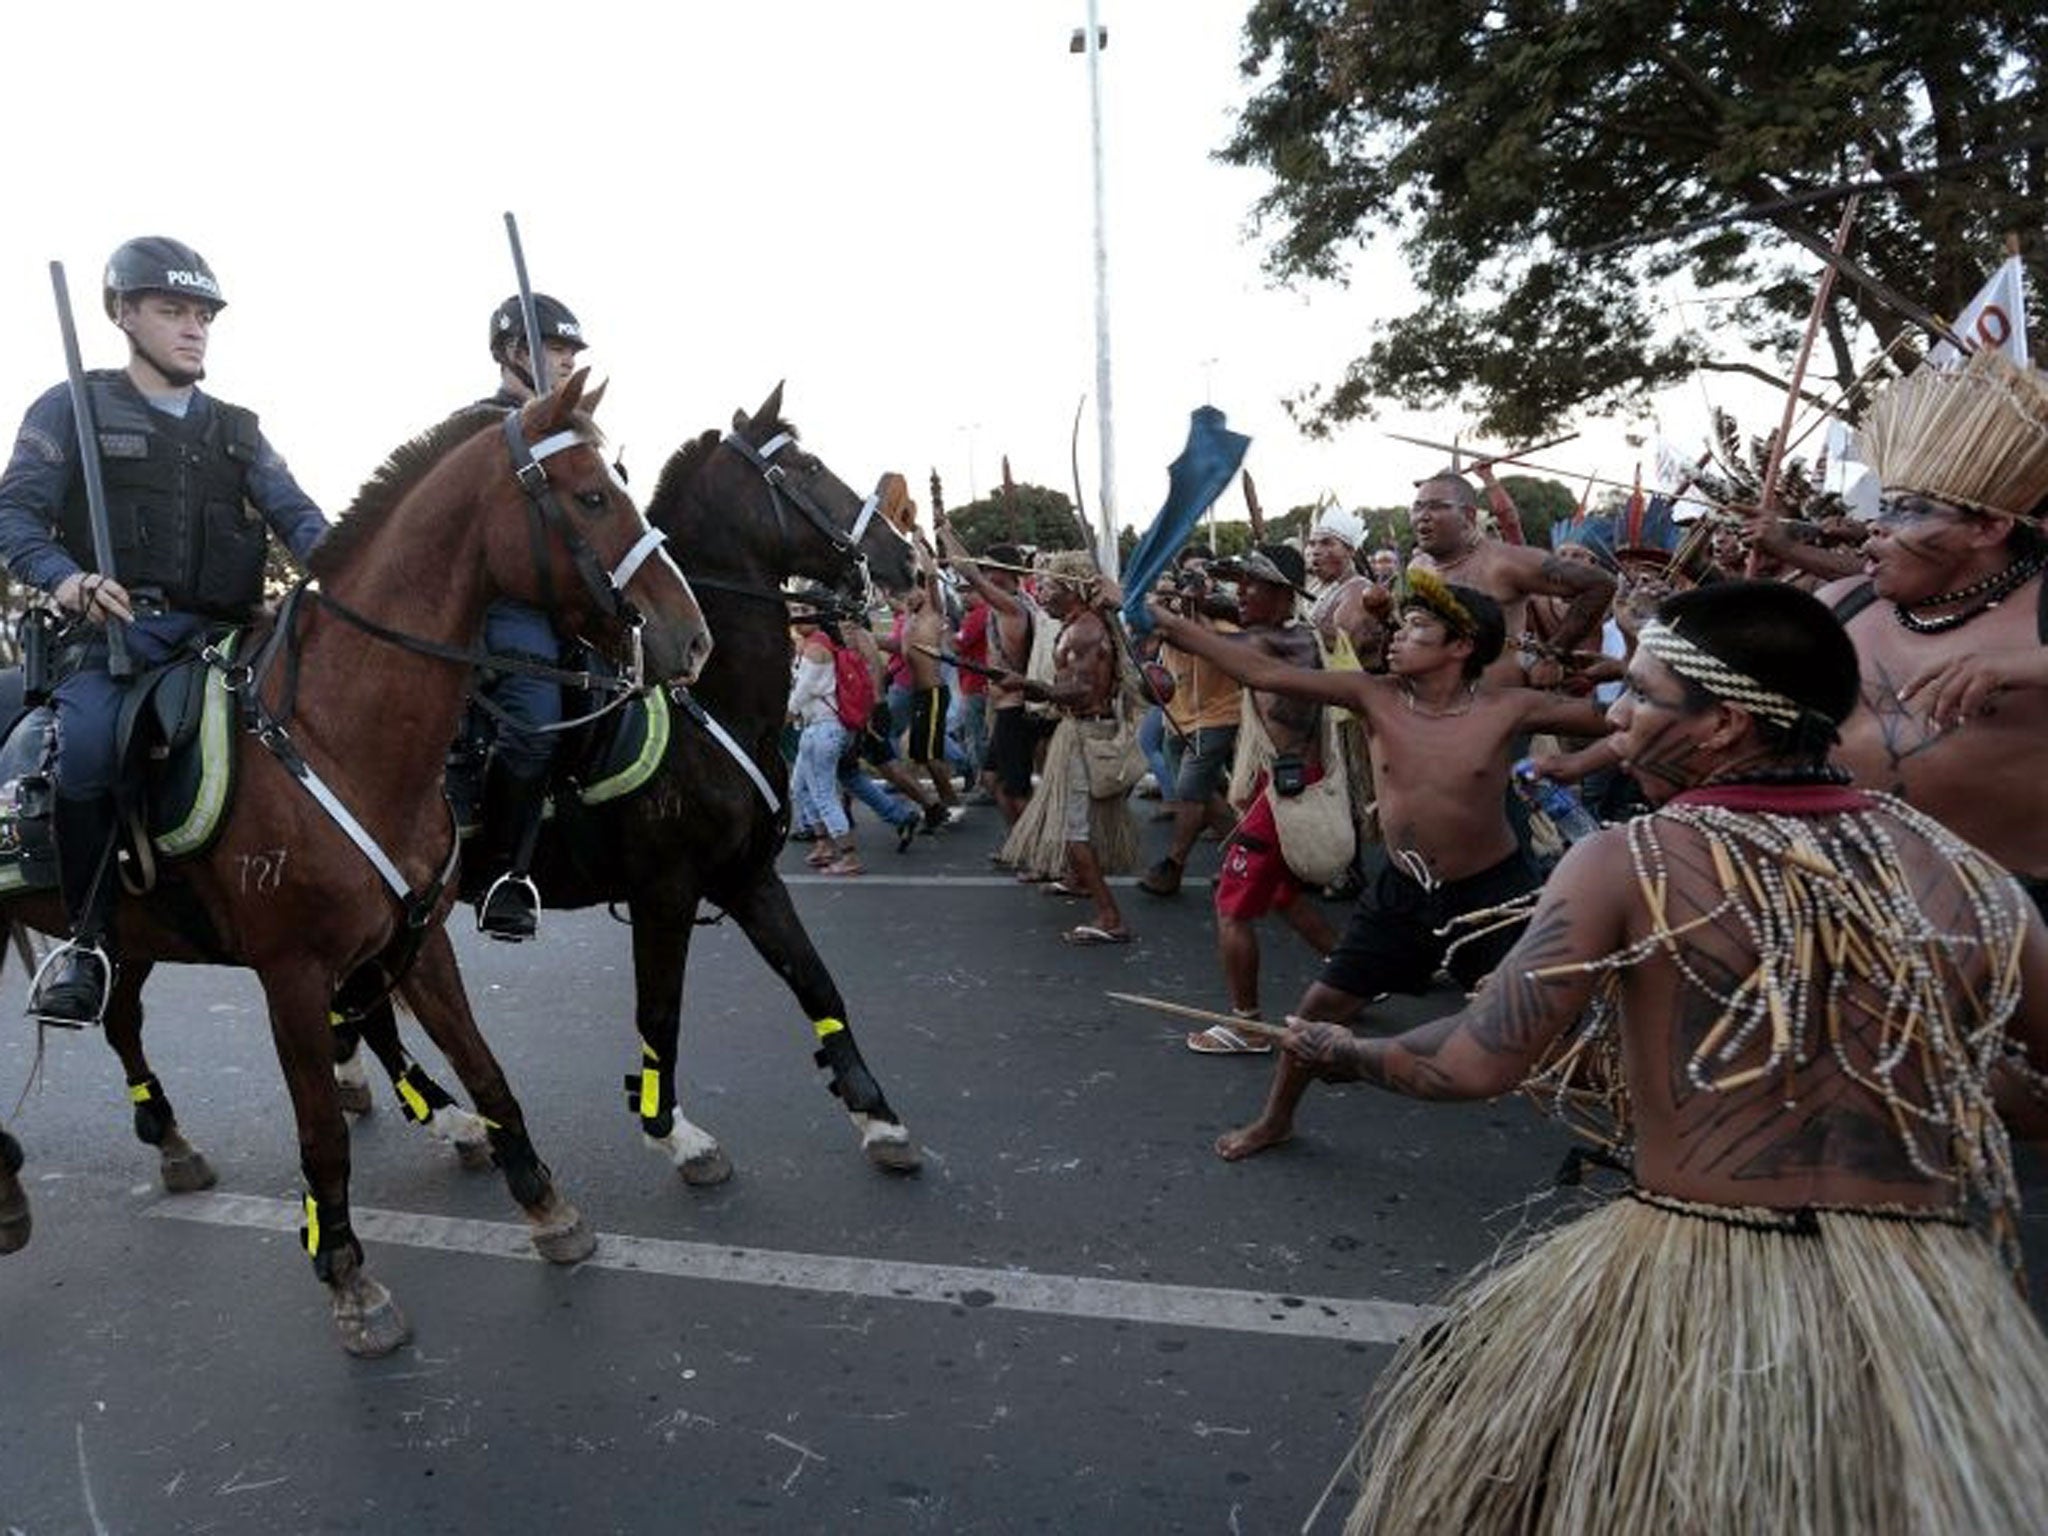 Police confront native Brazilians to prevent them from marching towards the Mane Garrincha soccer stadium during a demonstration in Brasilia May 27, 2014.